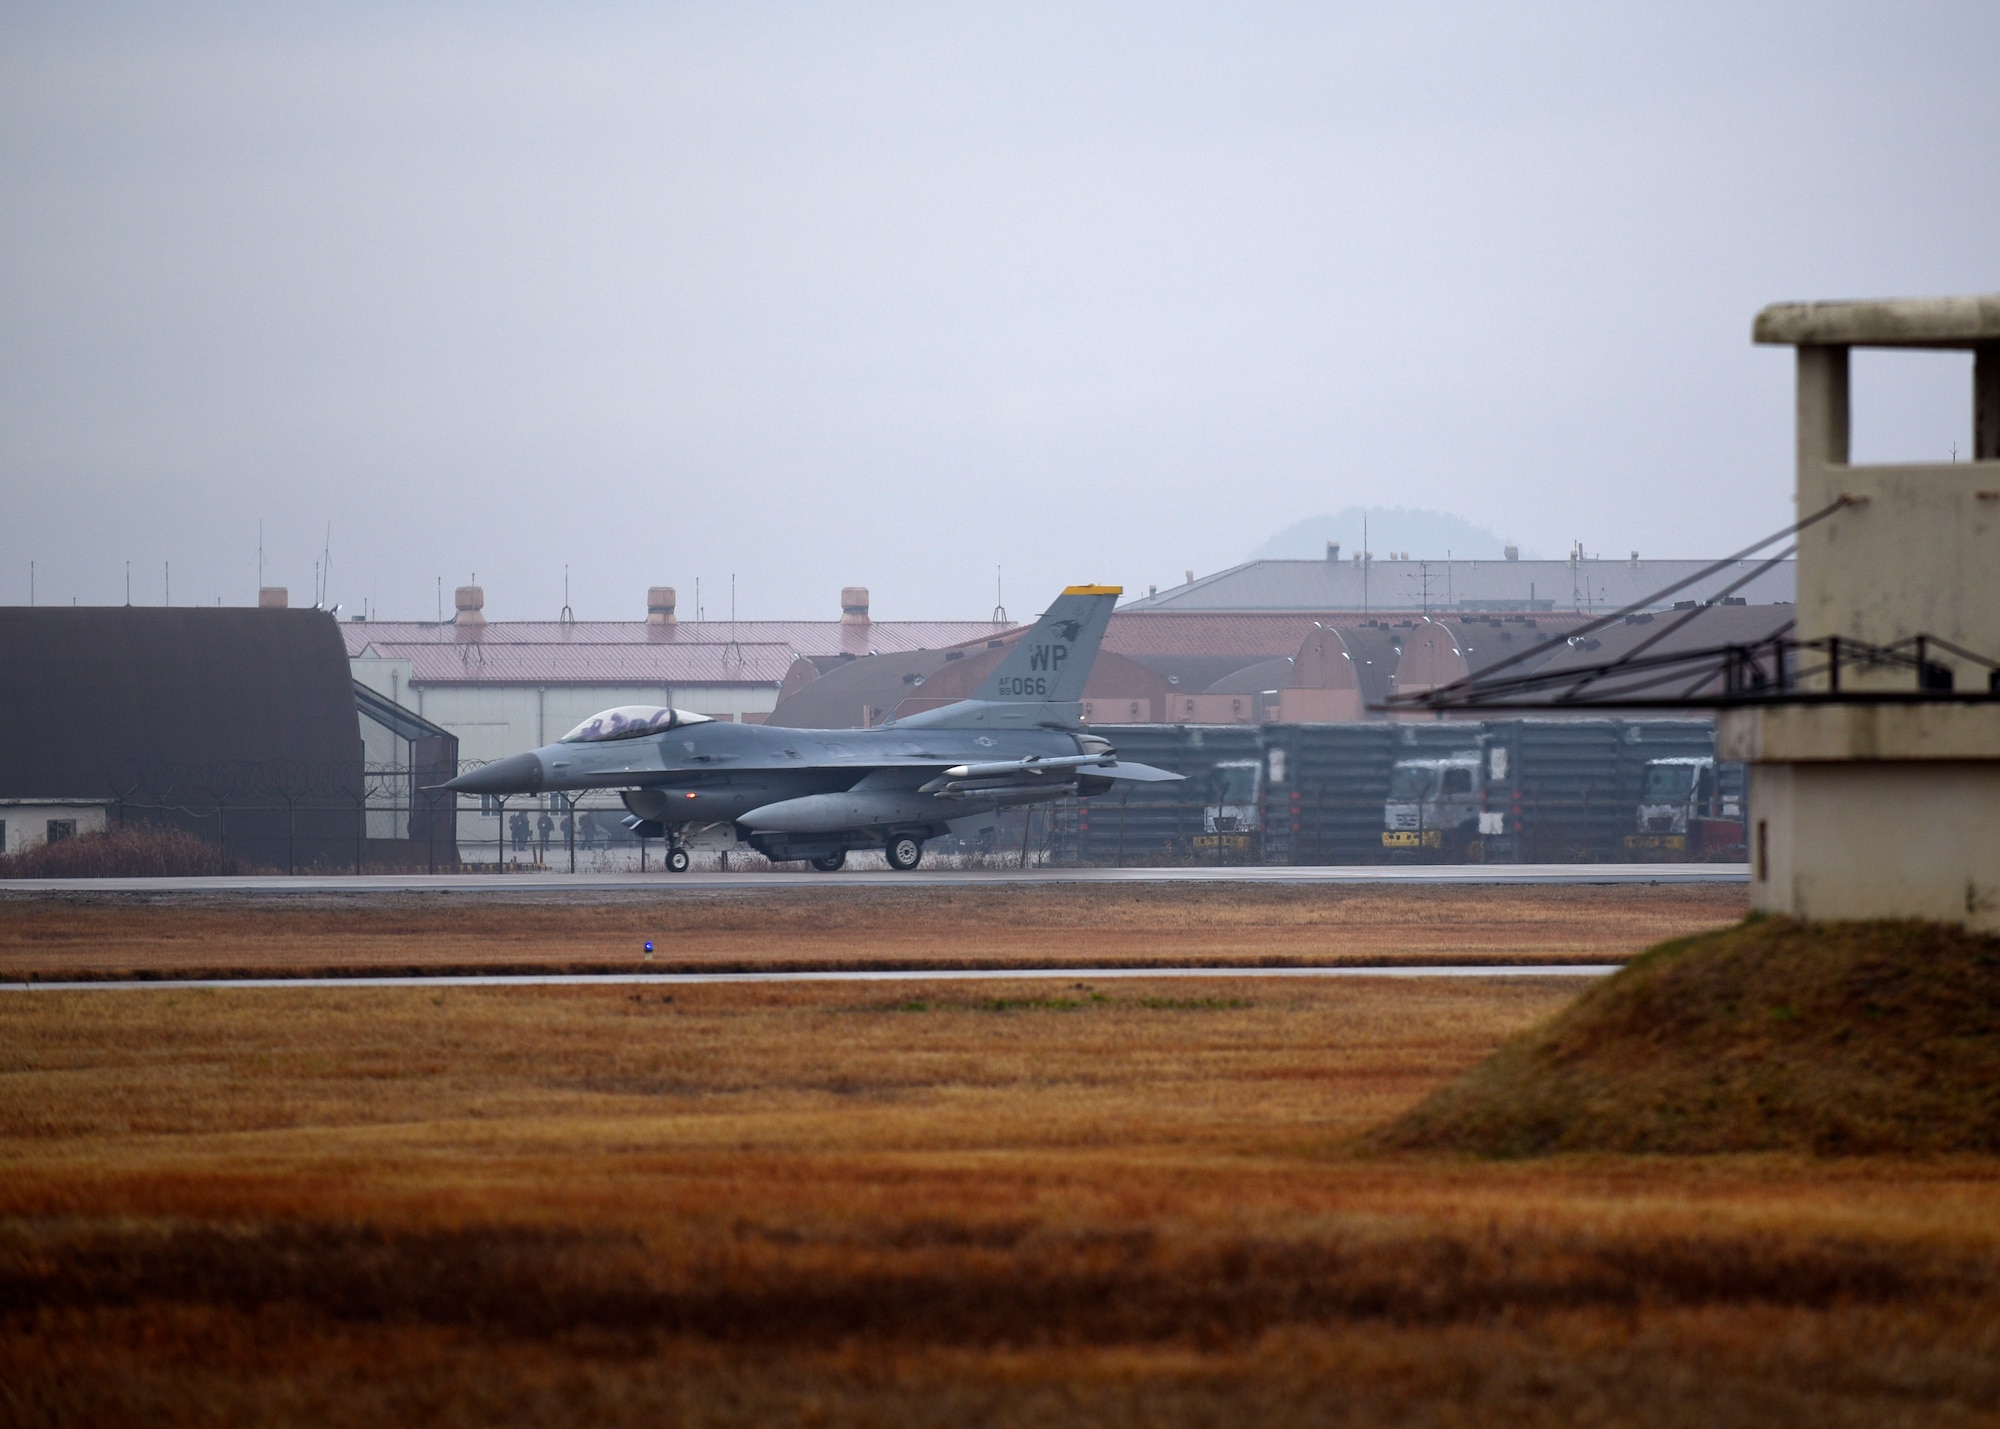 A U.S. Air Force F-16 Fighting Falcon assigned to the 8th Fighter Wing taxis to the runway in preparation for takeoff at Kunsan Air Base, Republic of Korea, Dec. 3, 2018. The highly maneuverable aircraft can withstand up to nine times the force of gravity with a full load of internal fuel. (U.S. Air Force photo by Tech. Sgt. Charles McNamara)